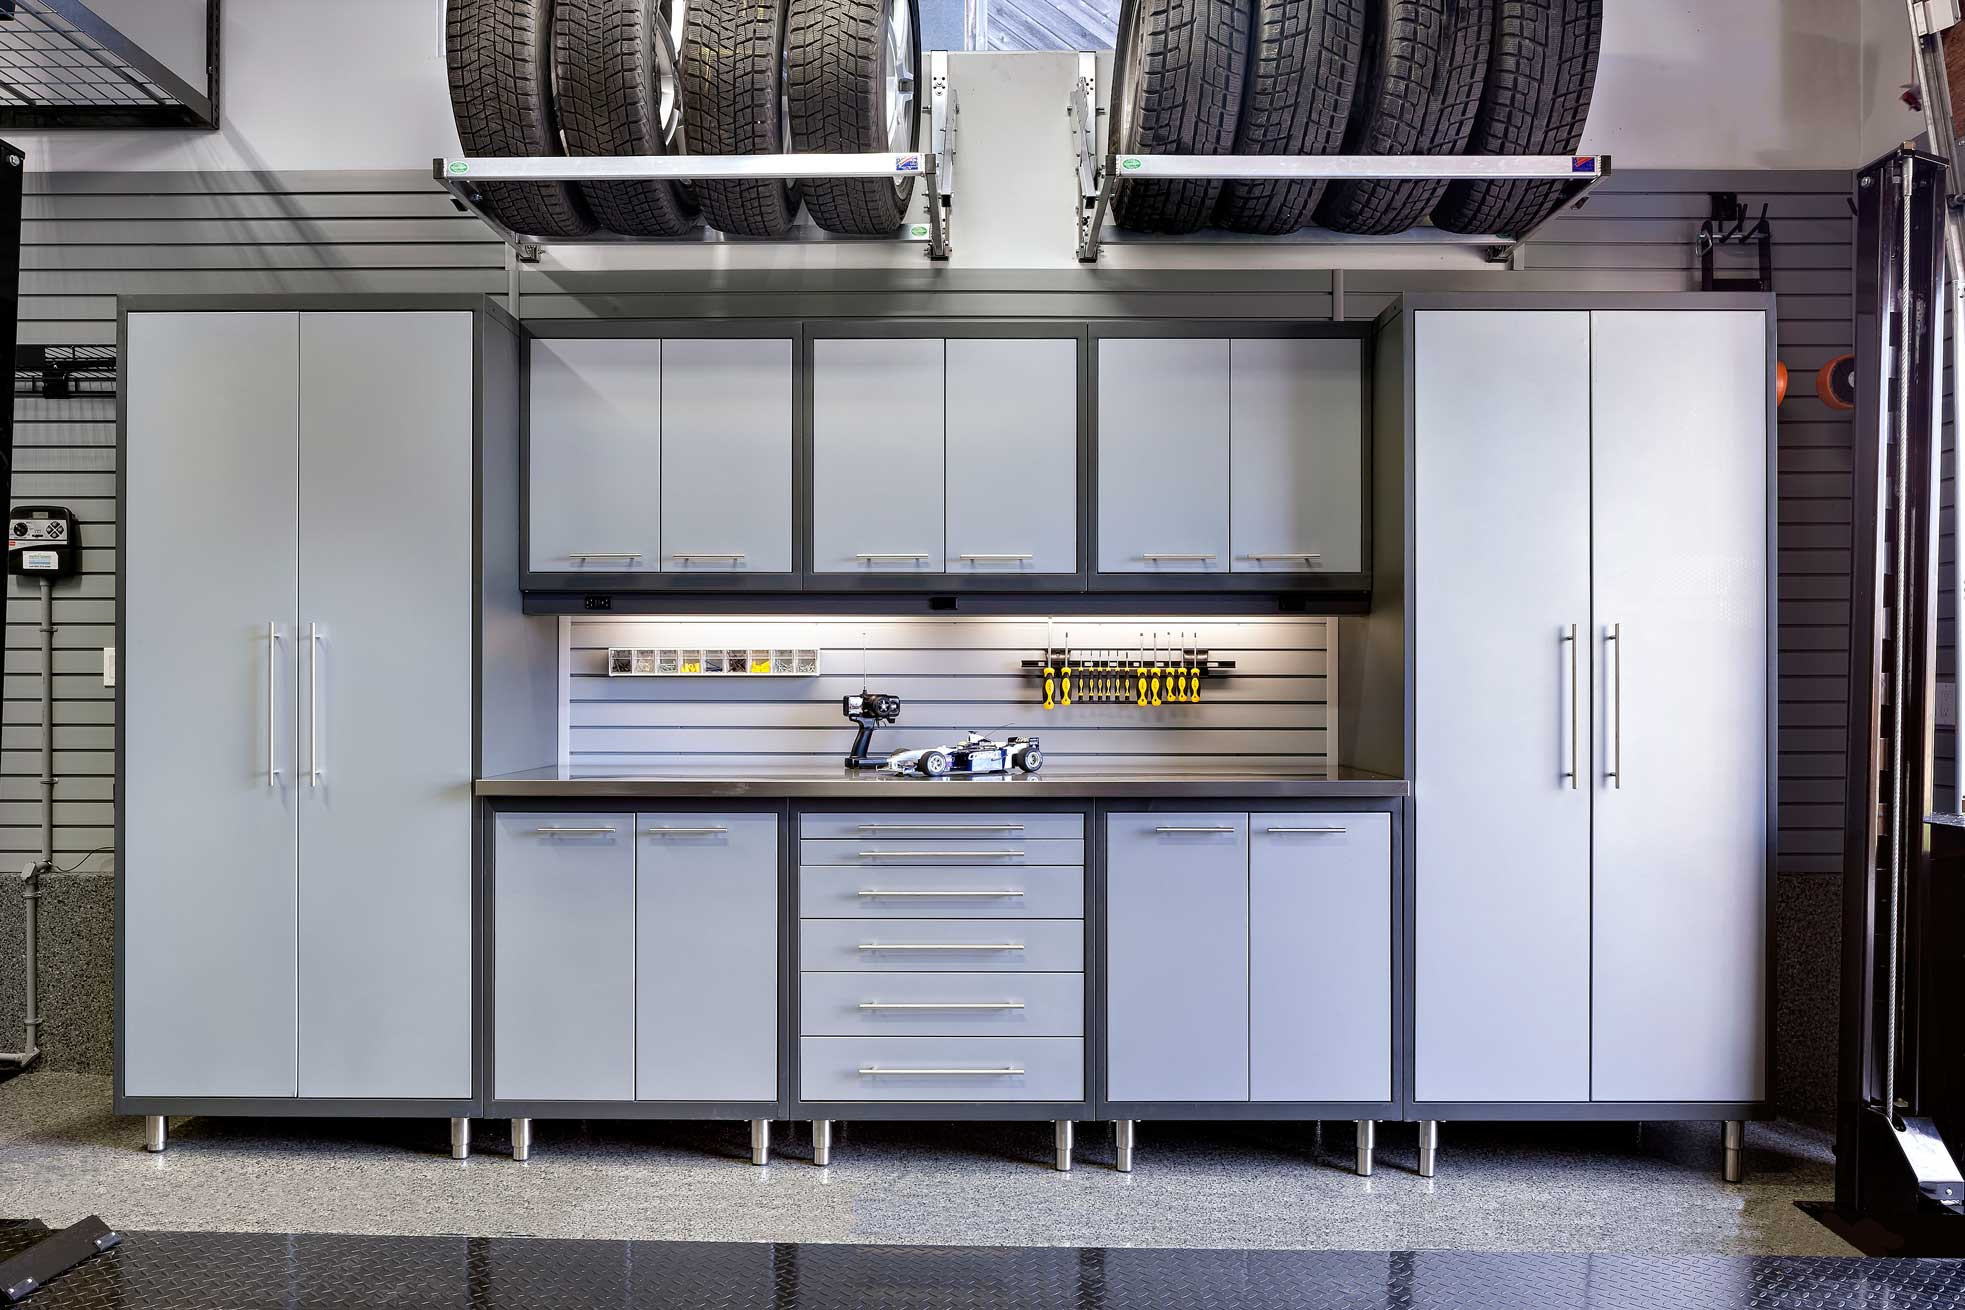 Garage Organization System
 4 Storage Options That Will Maximize Your Garage Space